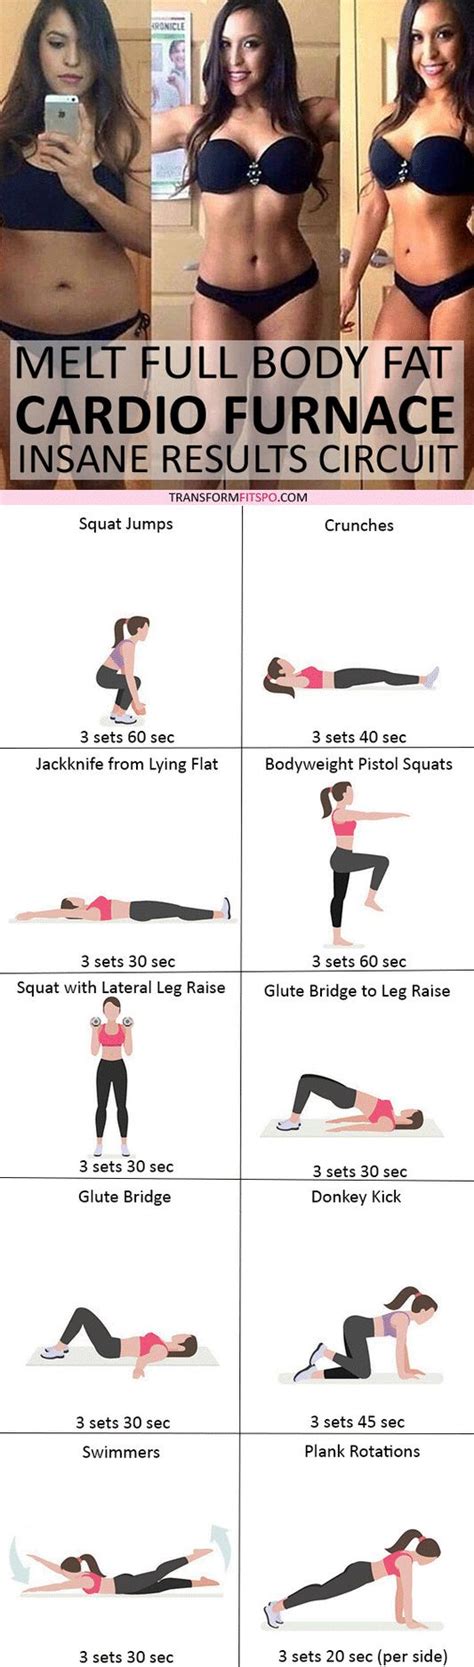 41972 Best • Health • Fitness • Images On Pinterest Exercise Workouts